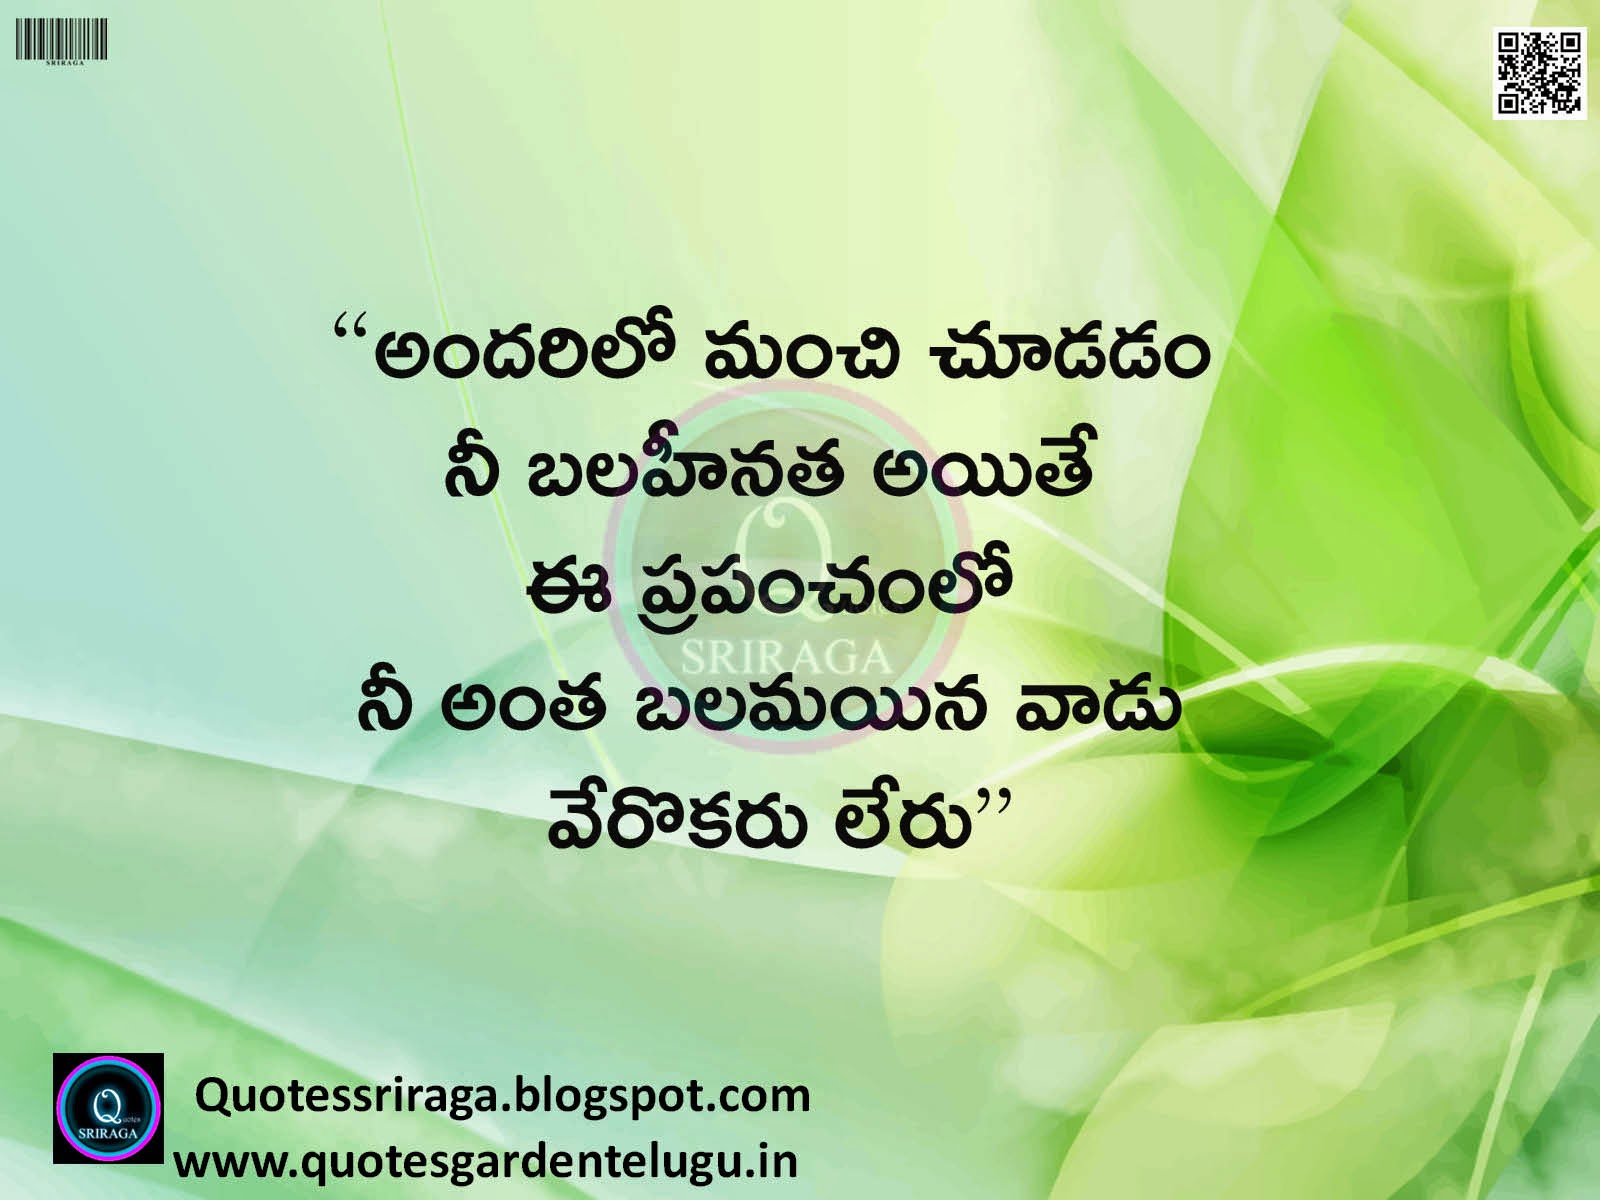 Best Telugu Quotes Good Reads Inspirational Quotes 42 with HD wallpapers images